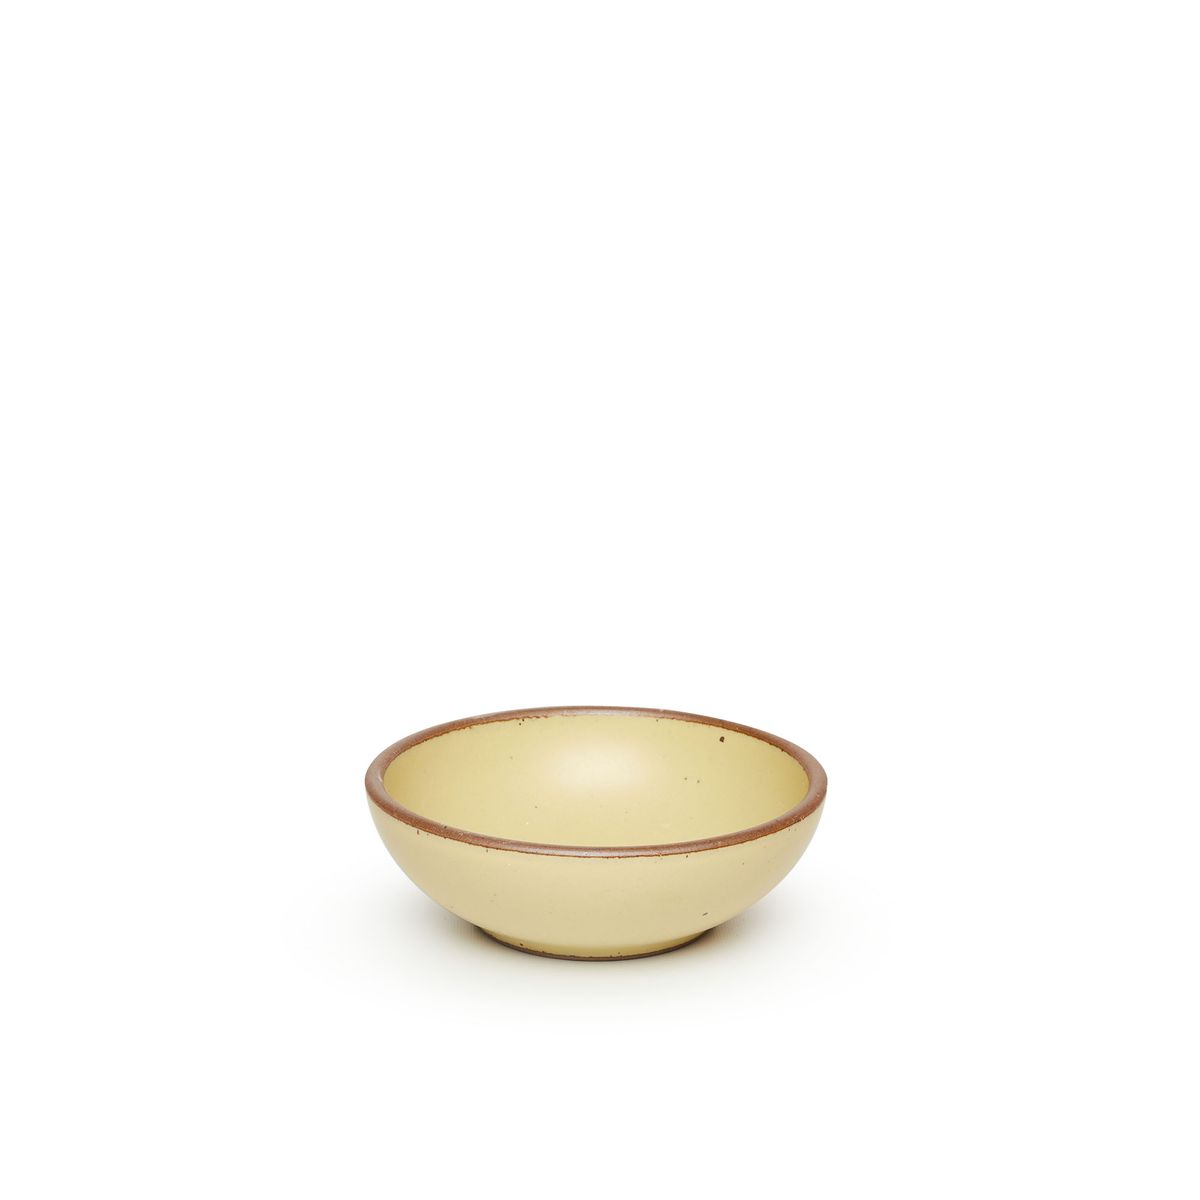 A small shallow ceramic bowl in a light butter yellow color featuring iron speckles and an unglazed rim